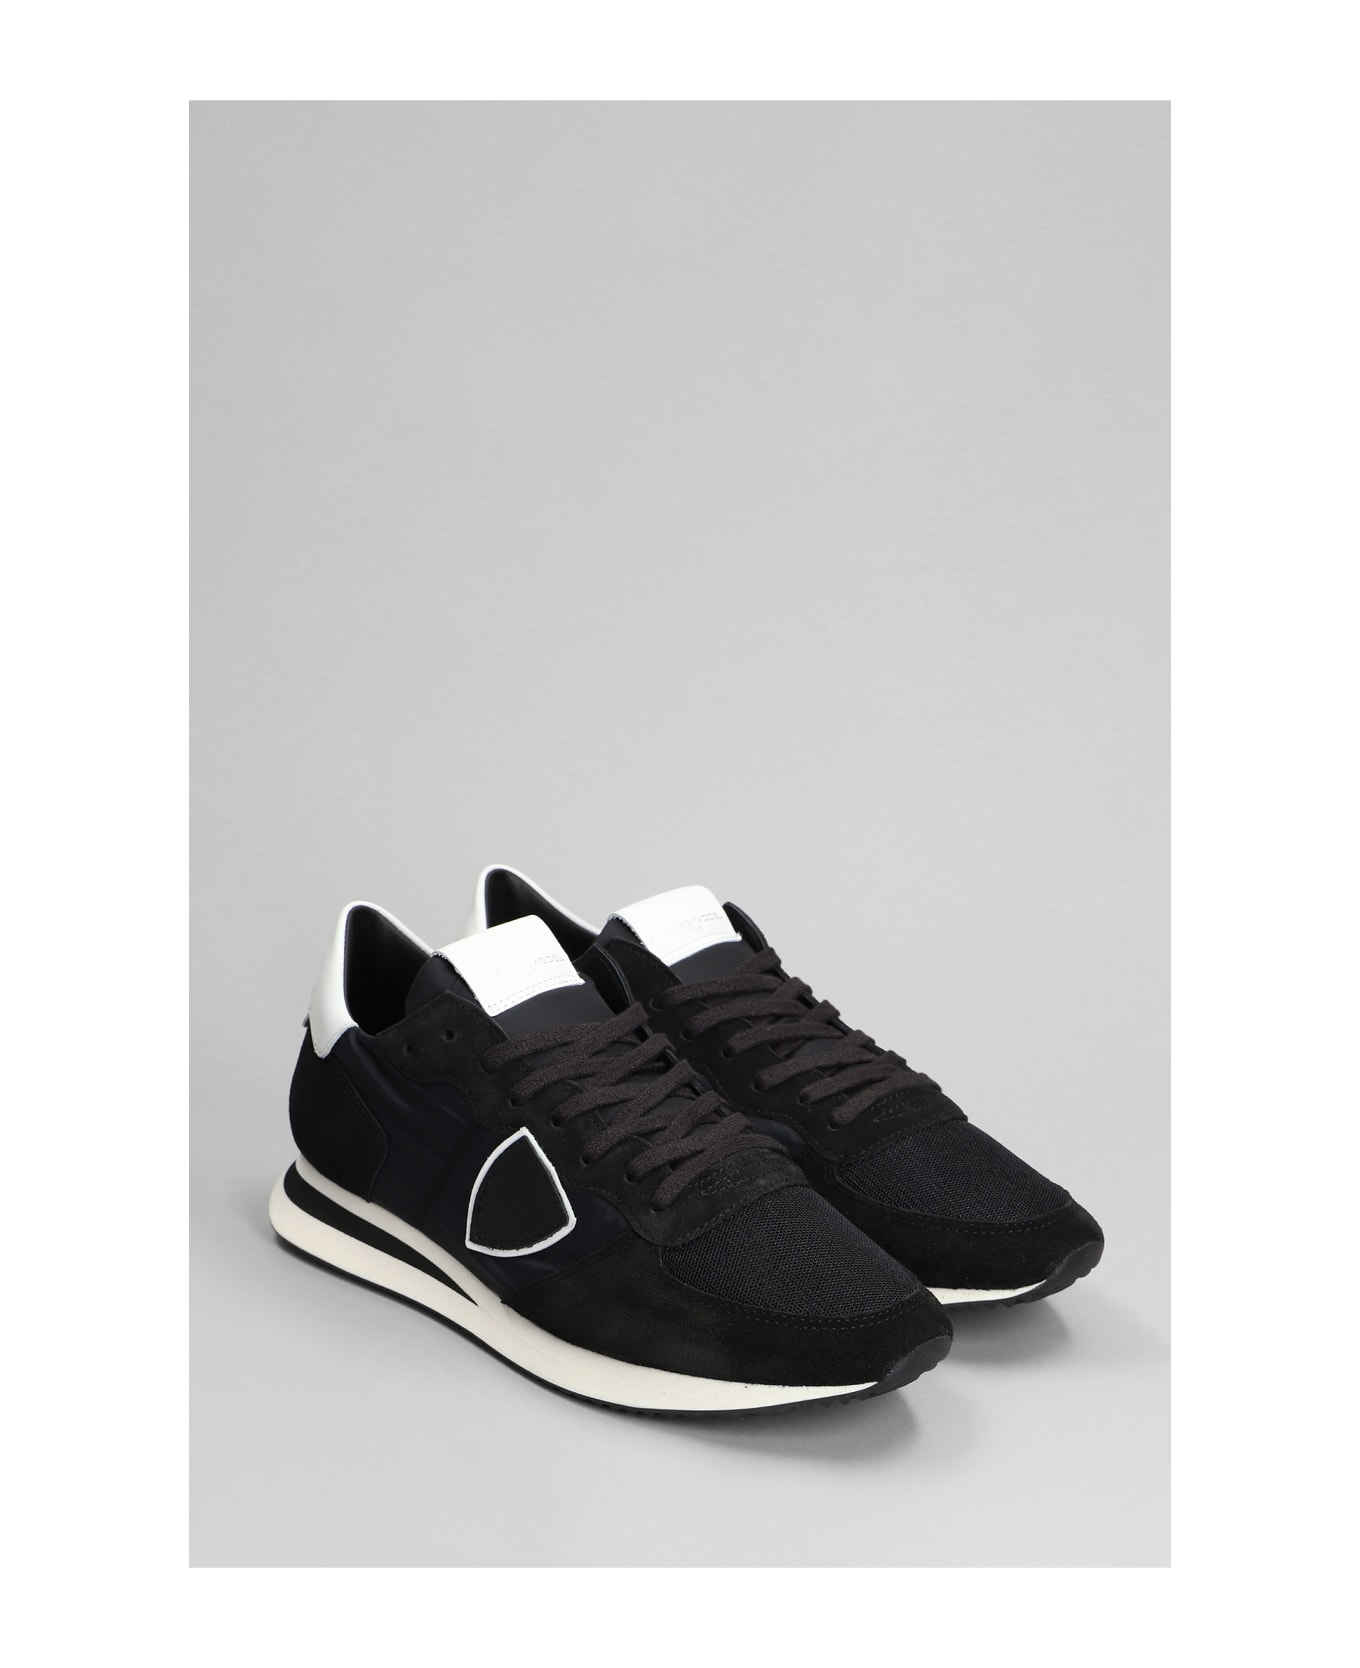 Philippe Model Trpx Low Sneakers In Black Suede And Fabric - black